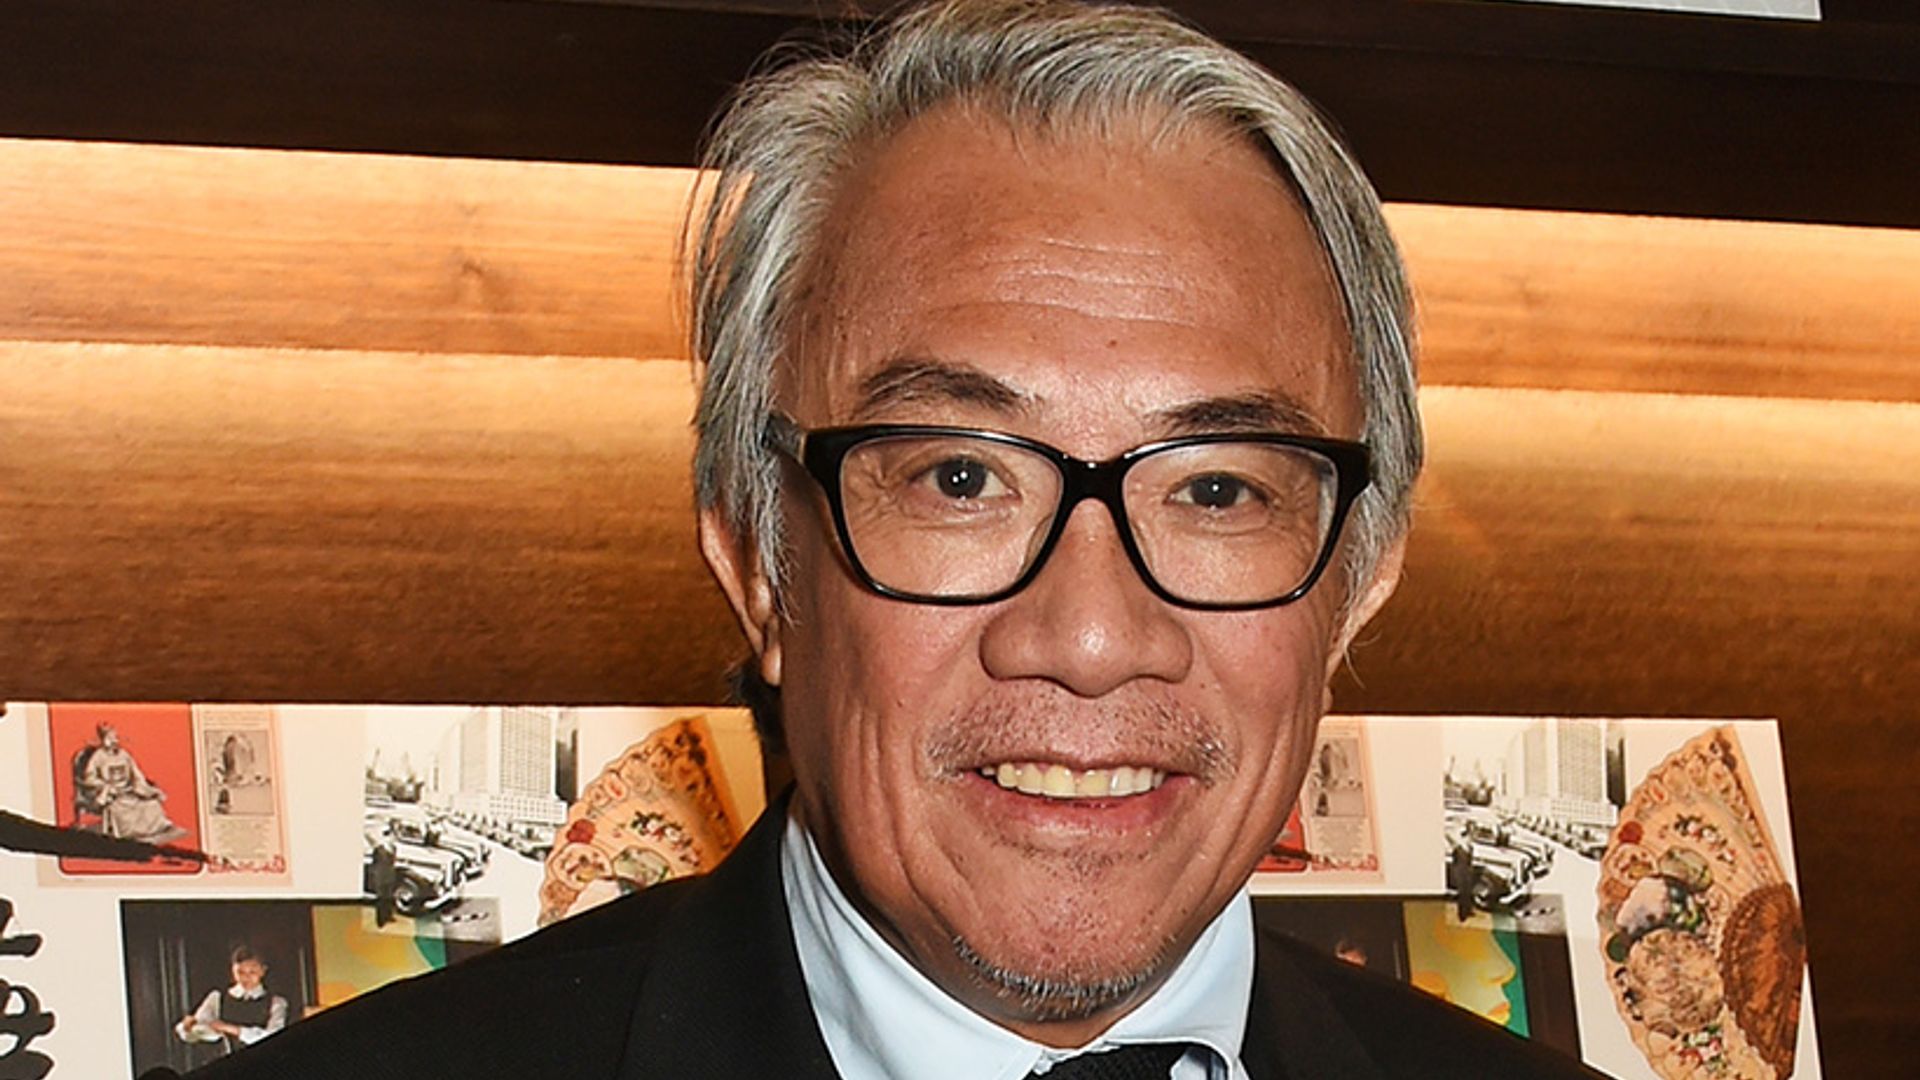 Sir David Tang, friend to royals and celebrities, dies aged 63